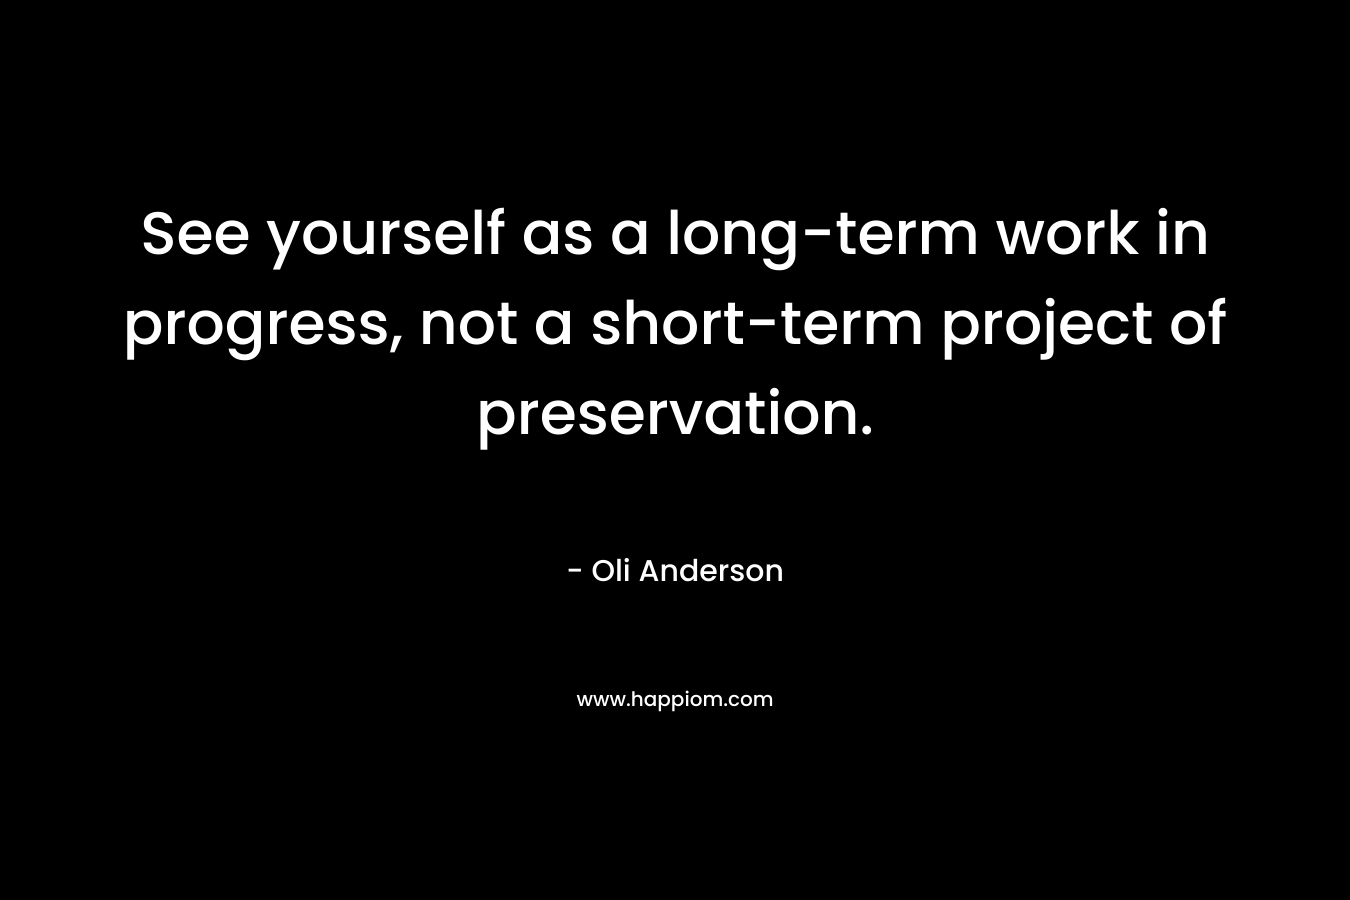 See yourself as a long-term work in progress, not a short-term project of preservation. – Oli Anderson